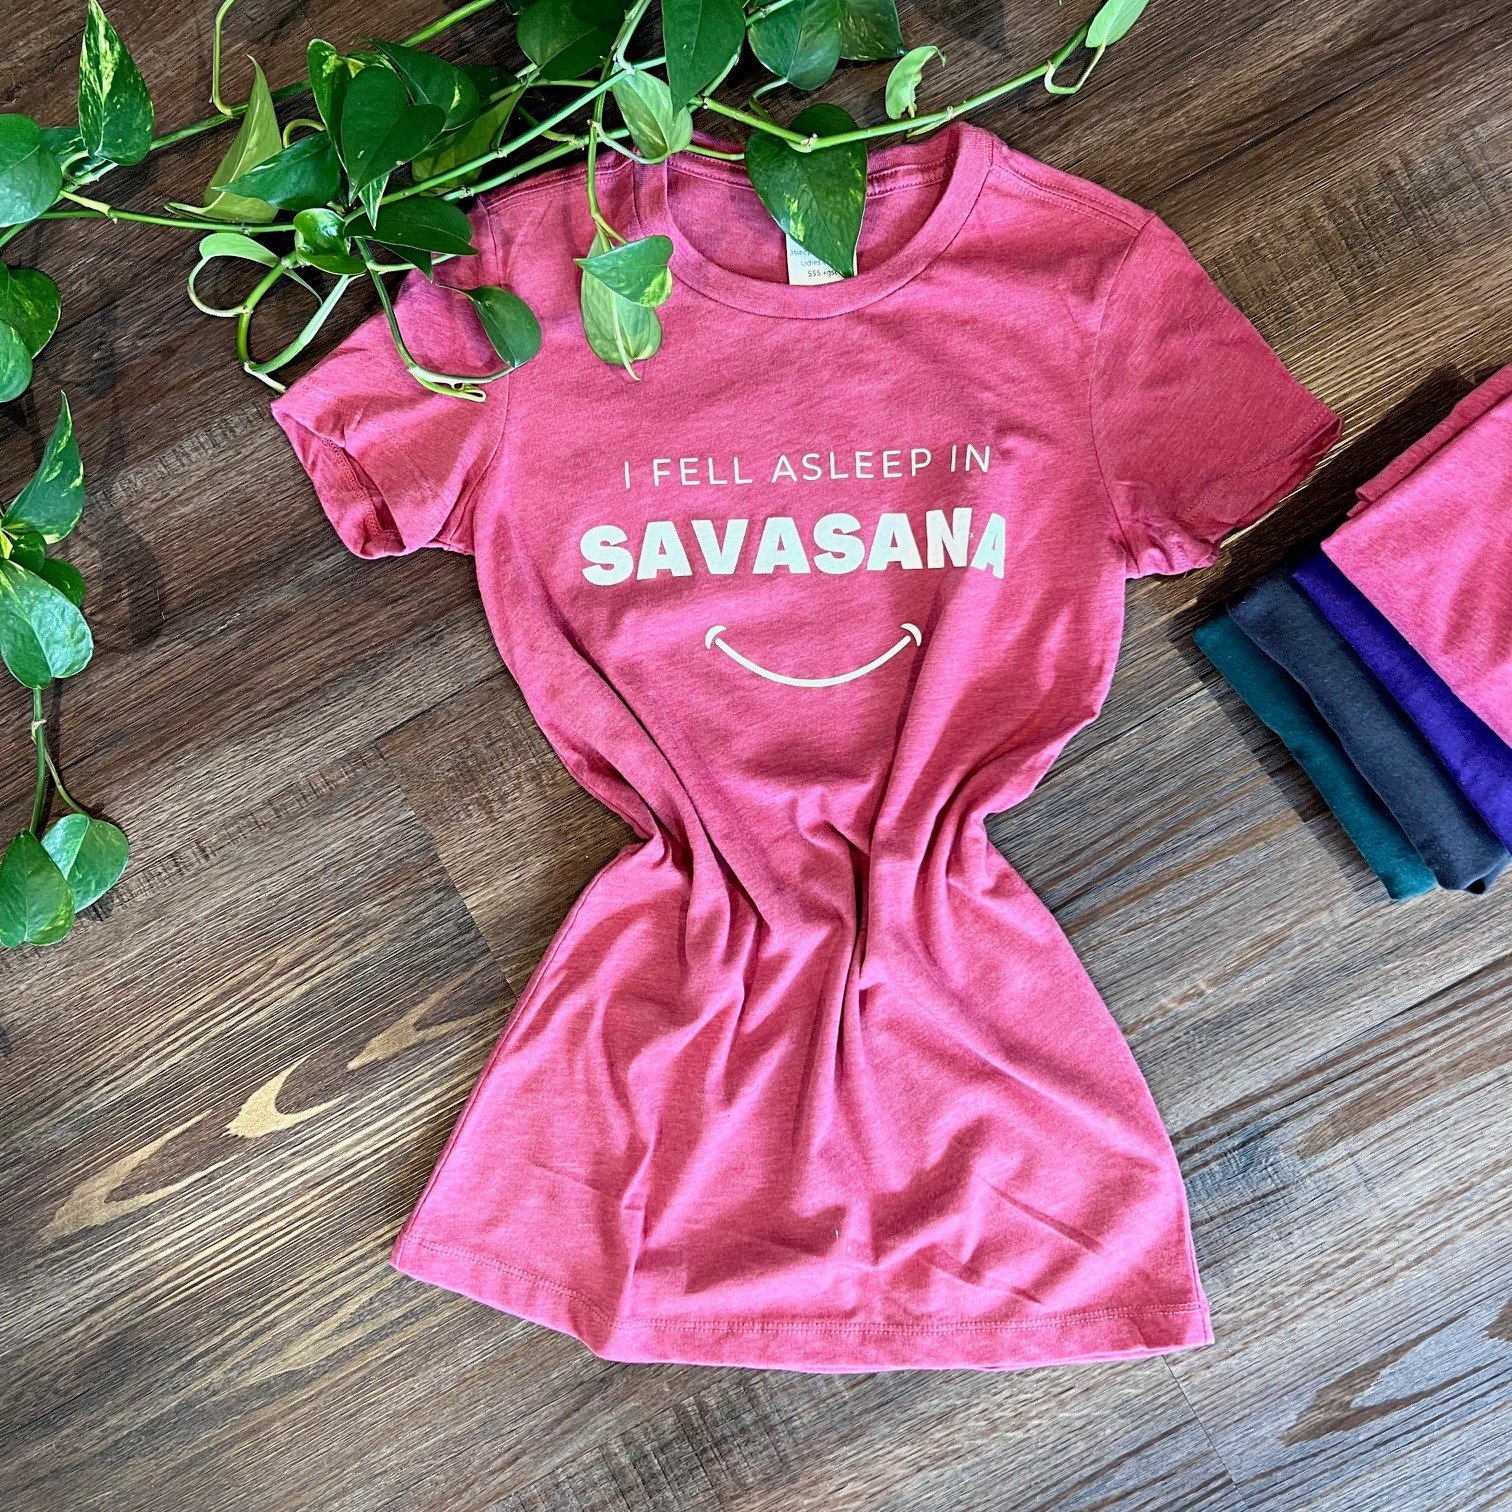 It happens ;)
&quot;I Fell Asleep In Savasana&quot; T-Shirts in Prop Shop✨

Enhance your t-shirt collection with this lightweight, comfortable, soft tri-blend fabric T, featuring the phrase 'I Fell Asleep in Savasana' on the front. Complete with a sm